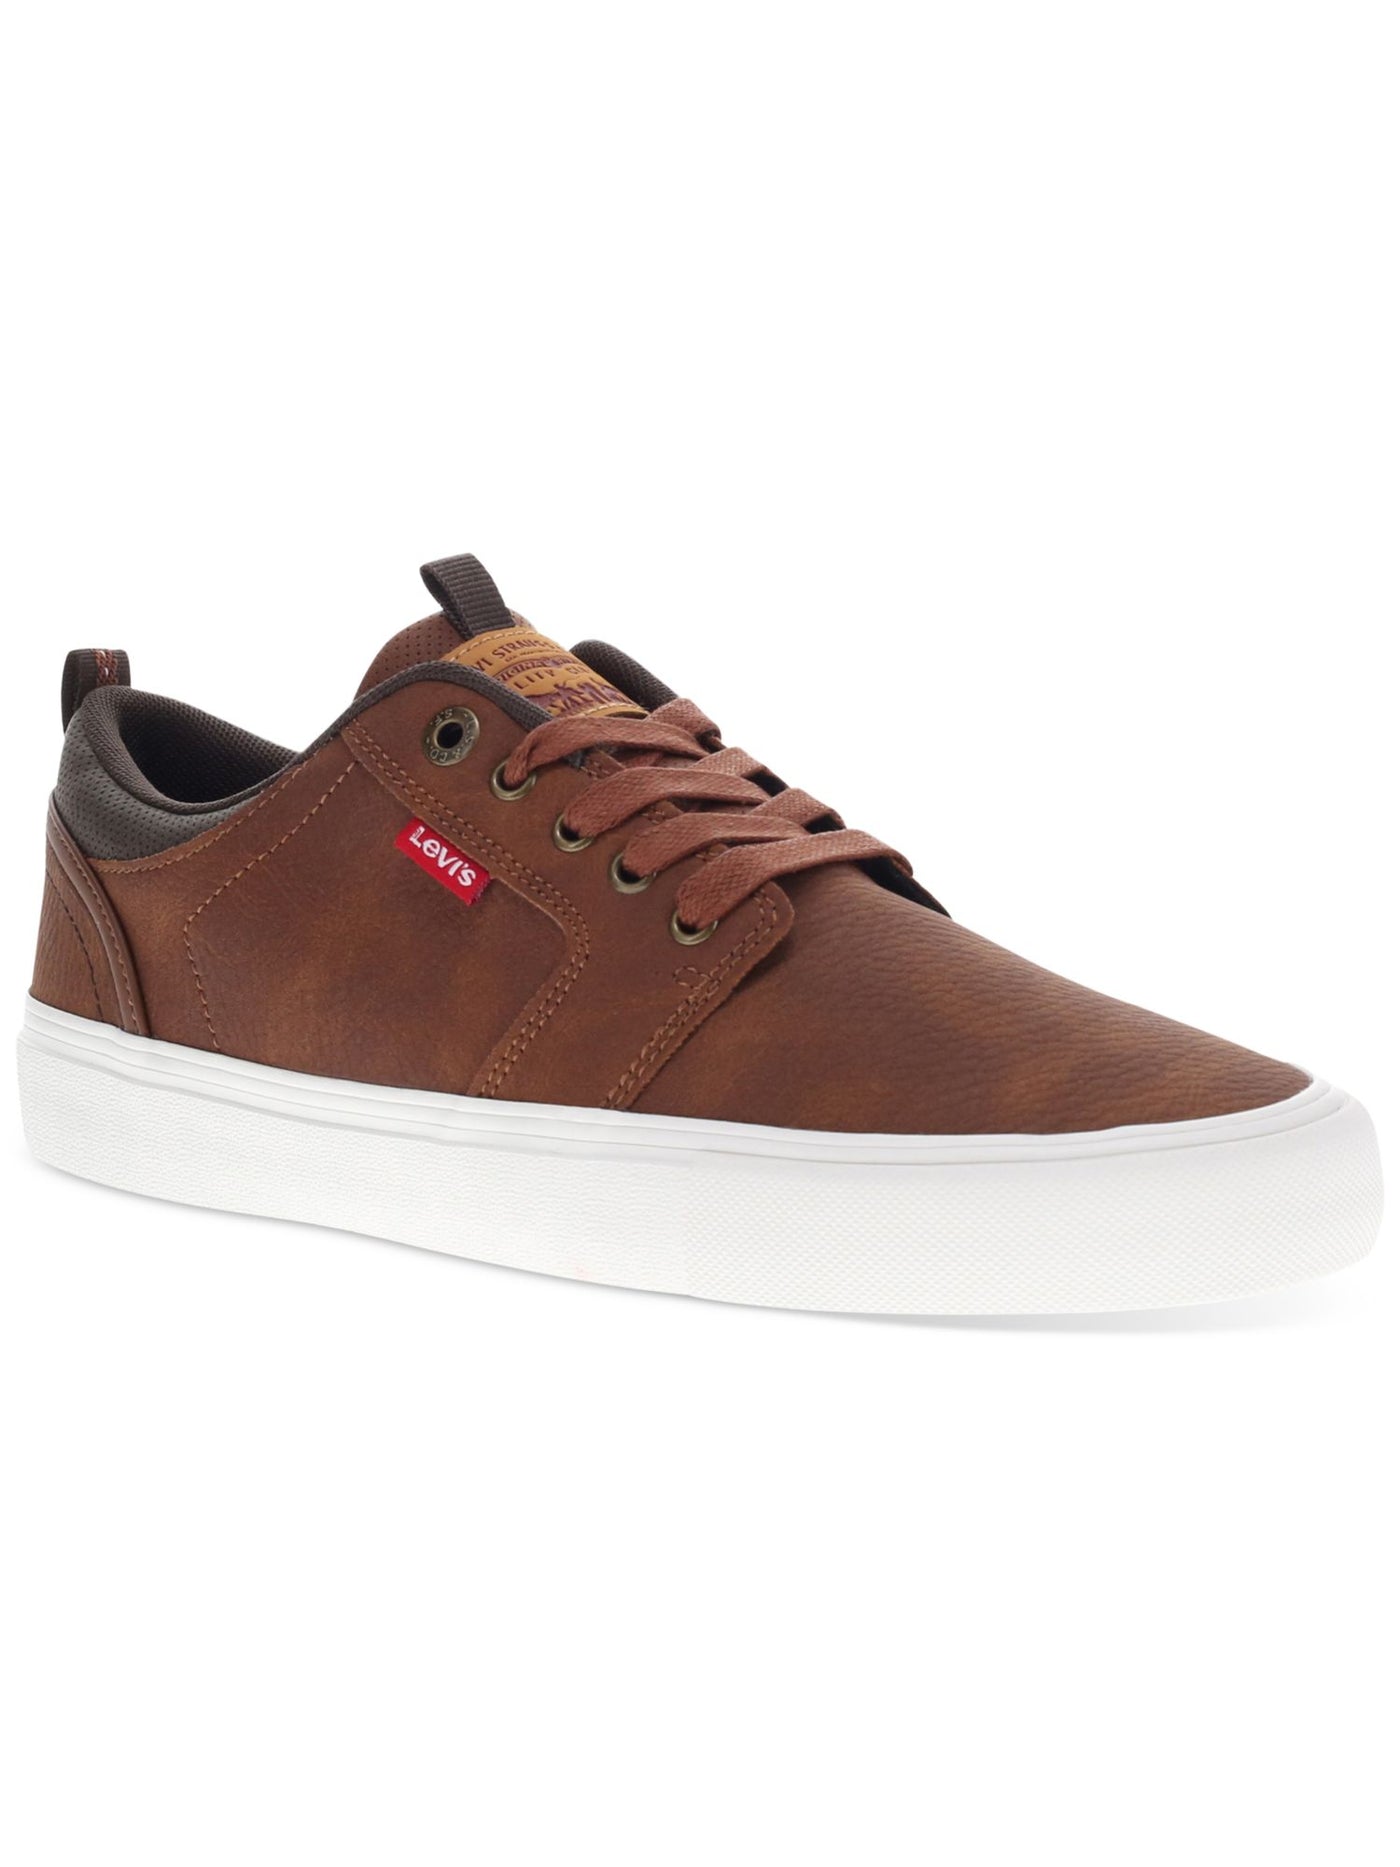 LEVI'S Mens Brown Pull-Tab At Heel And Tongue Removable Insole Cushioned Alpine Round Toe Lace-Up Sneakers Shoes 11